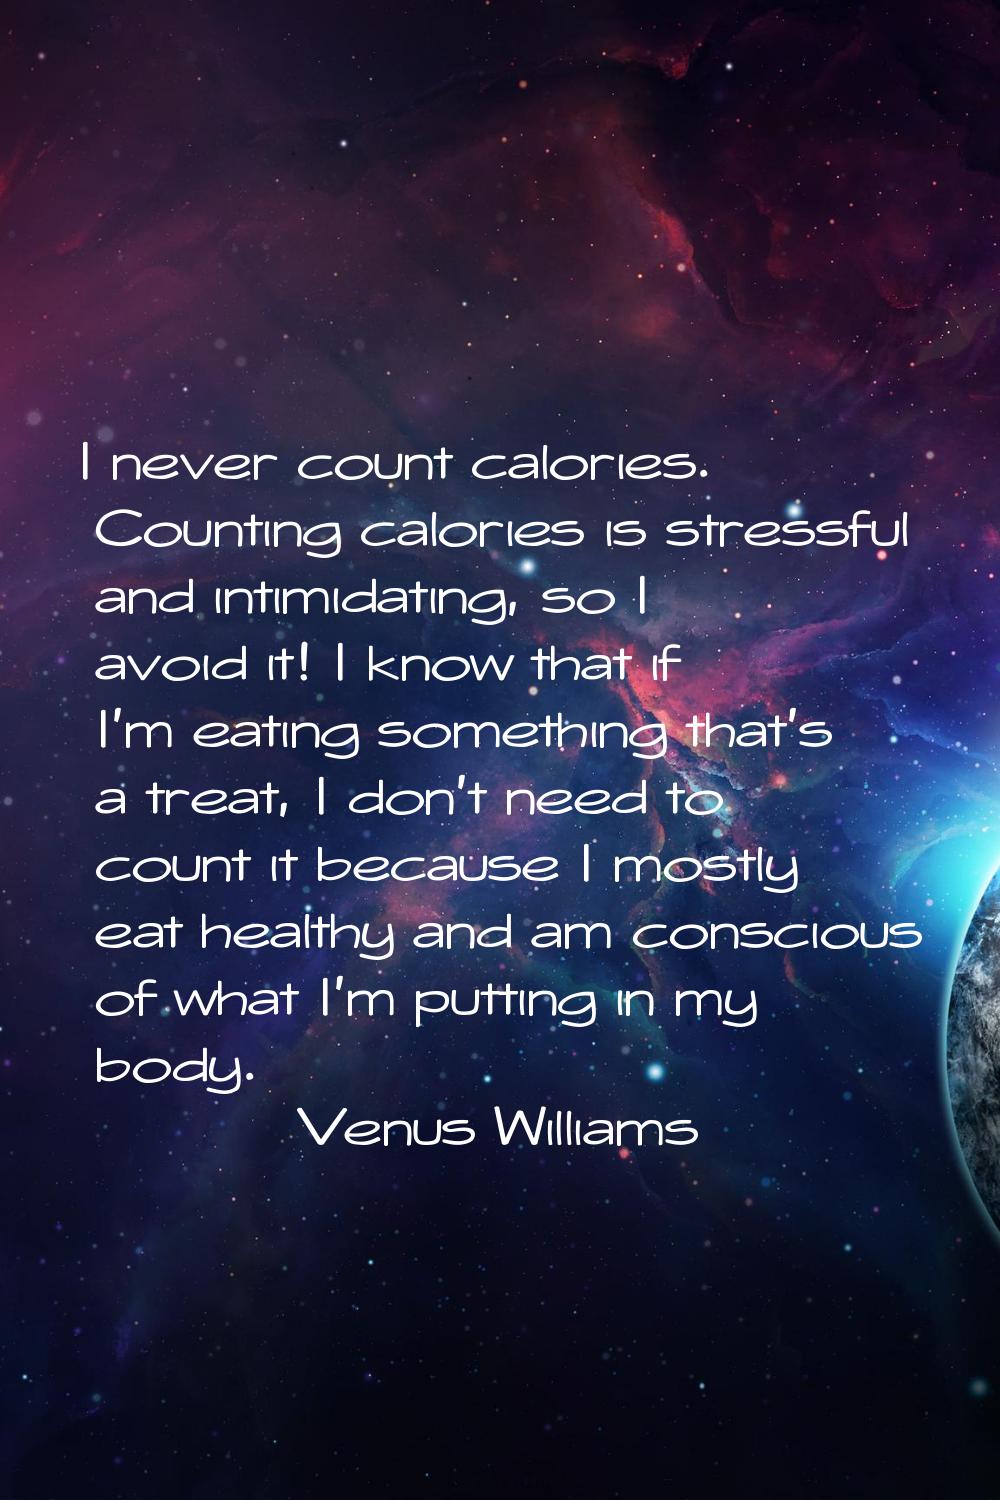 I never count calories. Counting calories is stressful and intimidating, so I avoid it! I know that